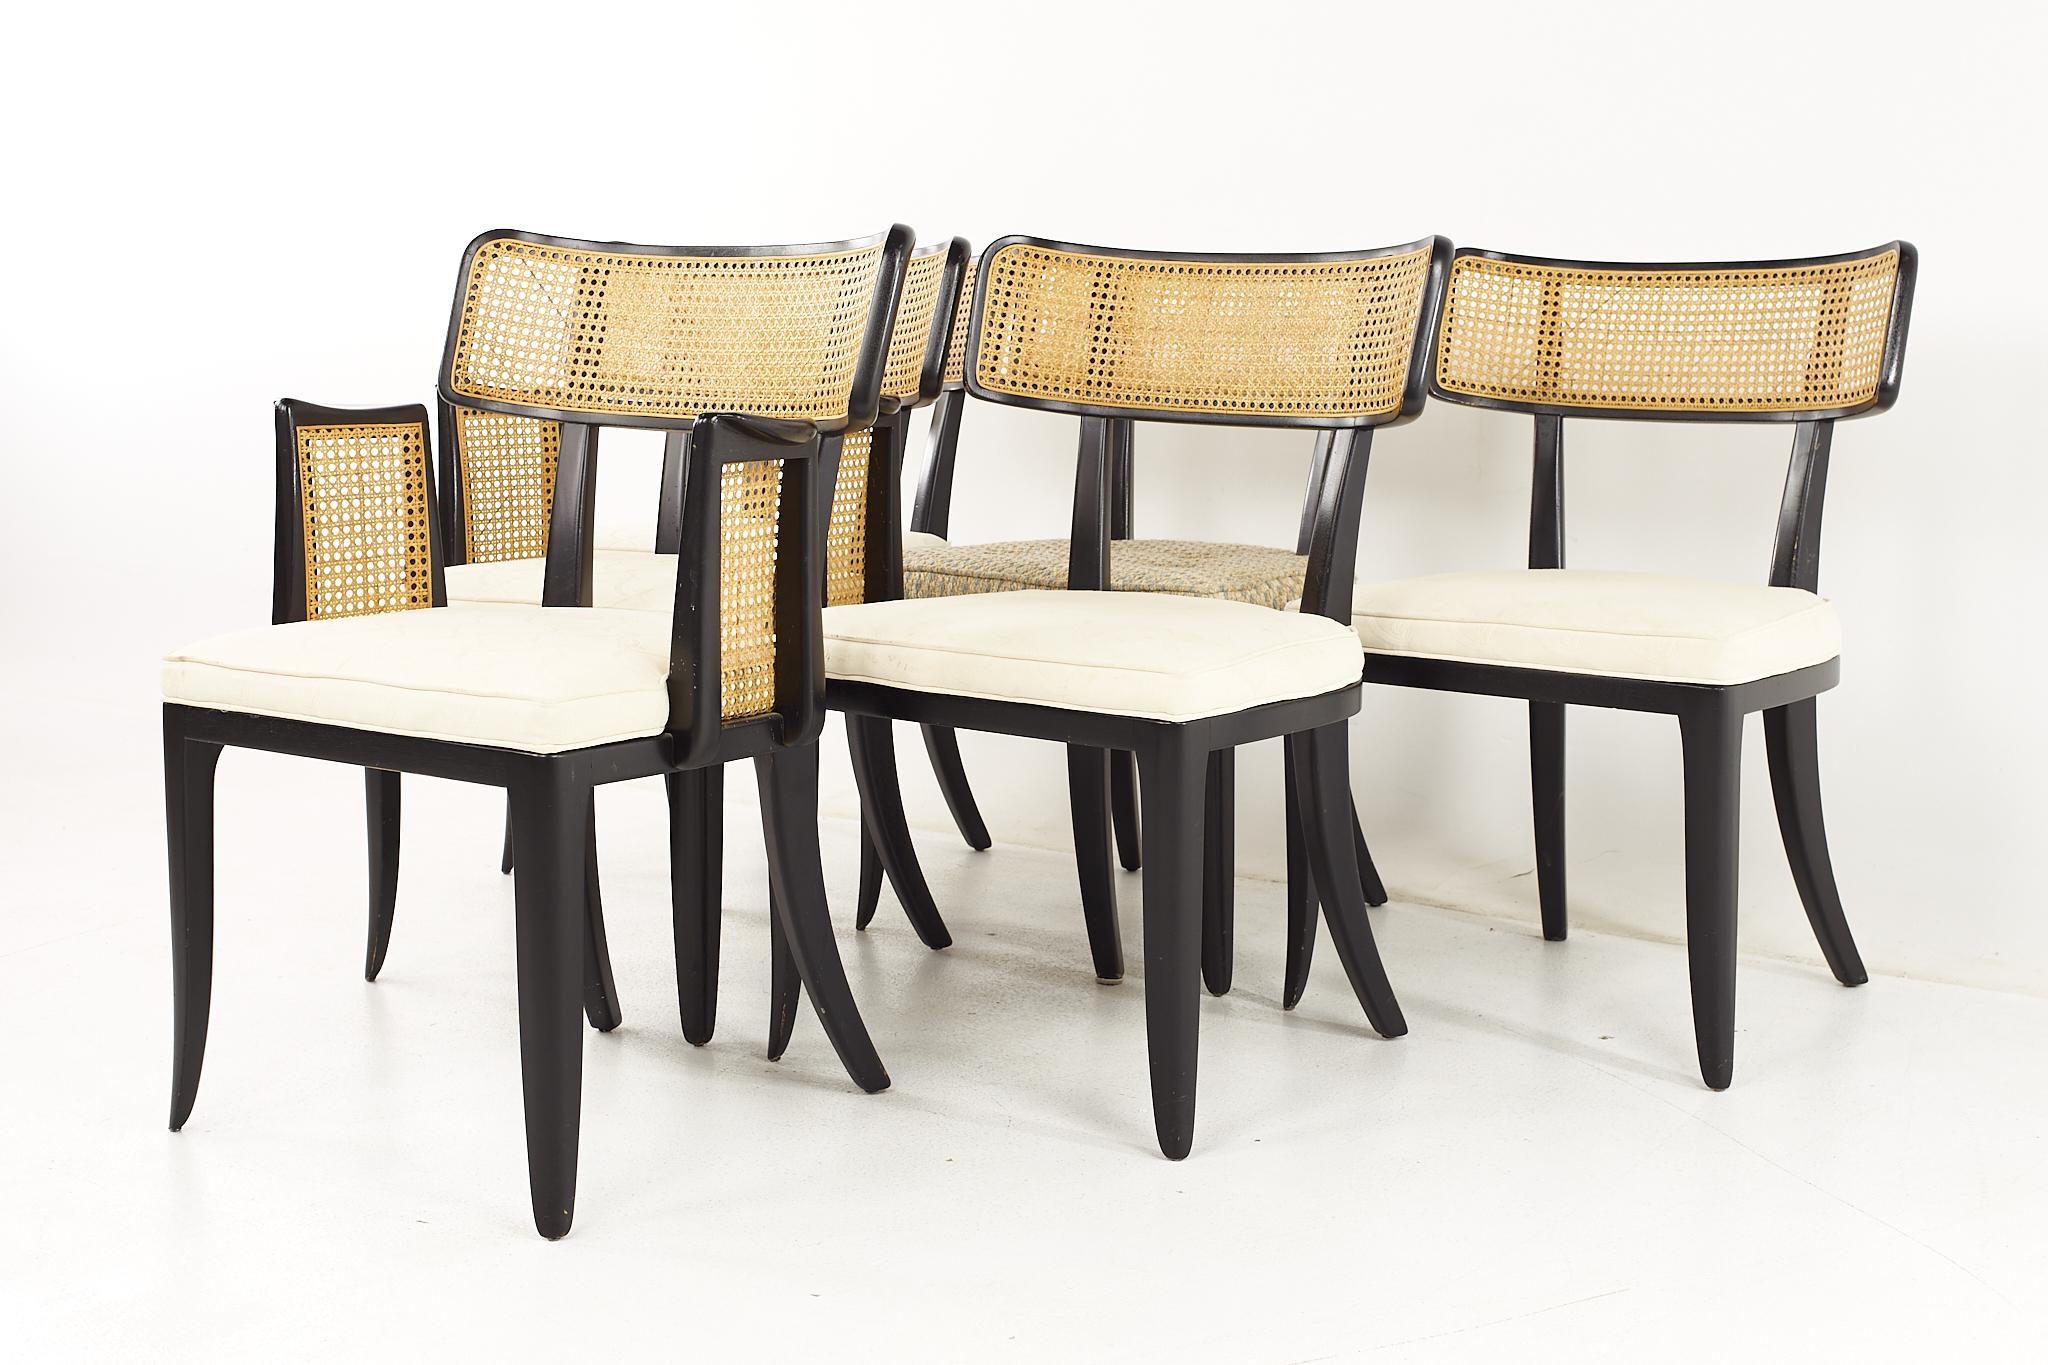 Mid-Century Modern Edward Wormley for Dunbar Mid Century Cane Back Dining Chairs - Set of 6 For Sale